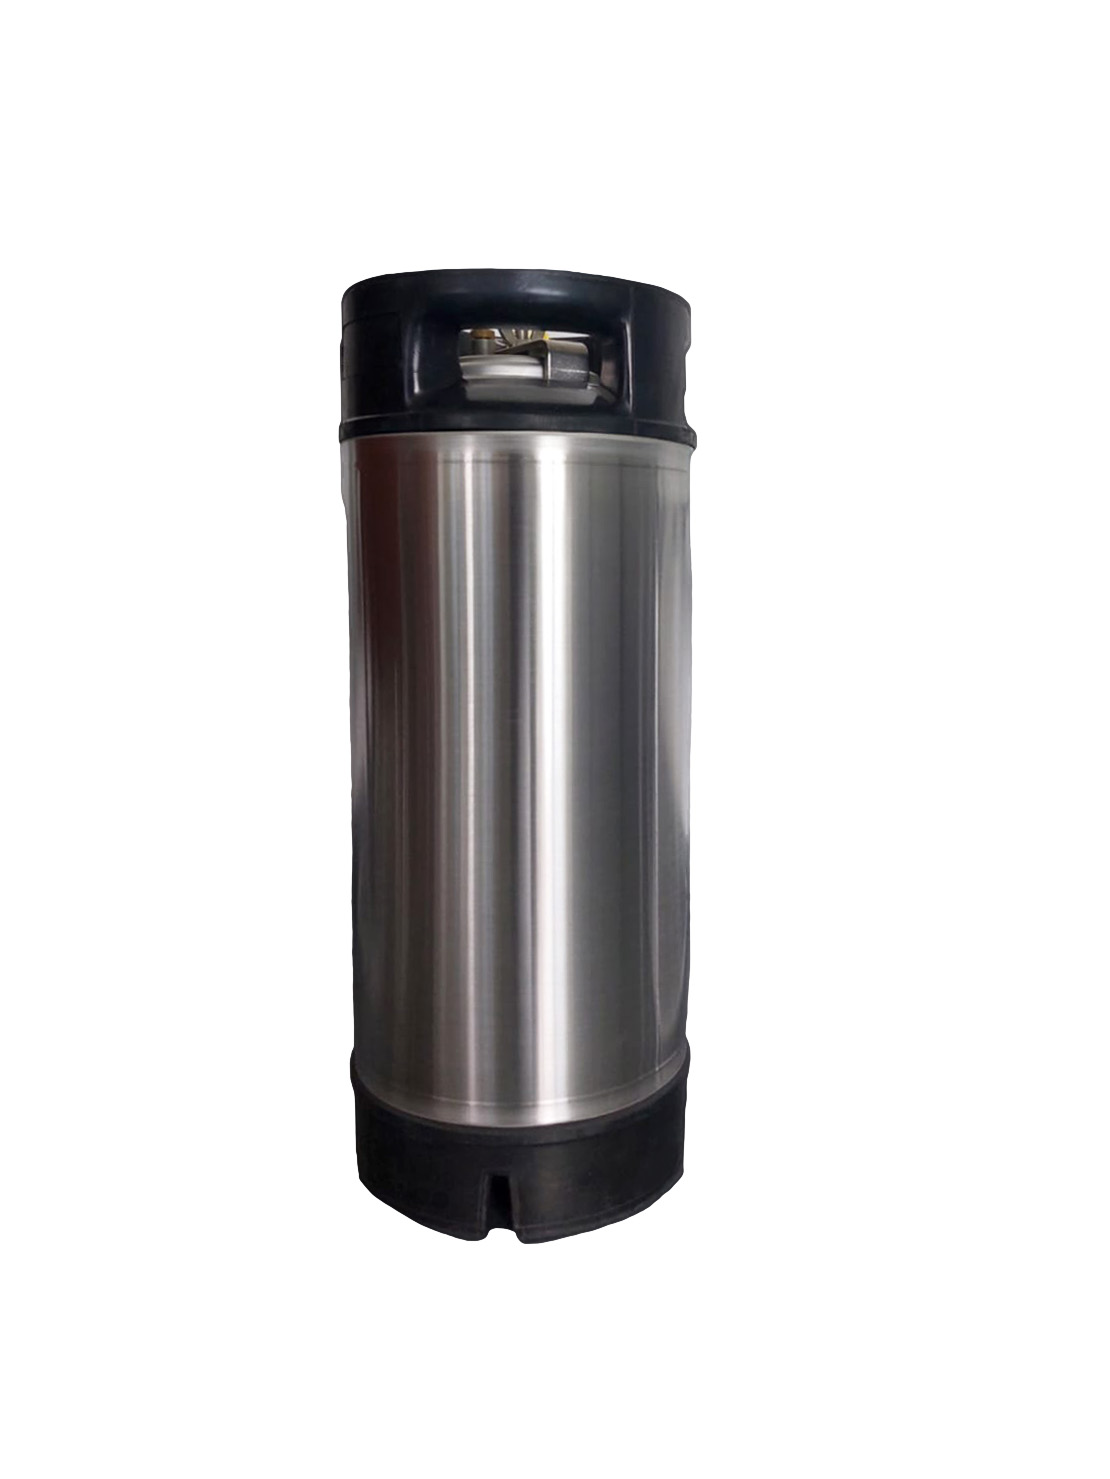 49 Liter Stainless Steel Mixed Bed Demineralization Cartridge Filled with Premium Resin